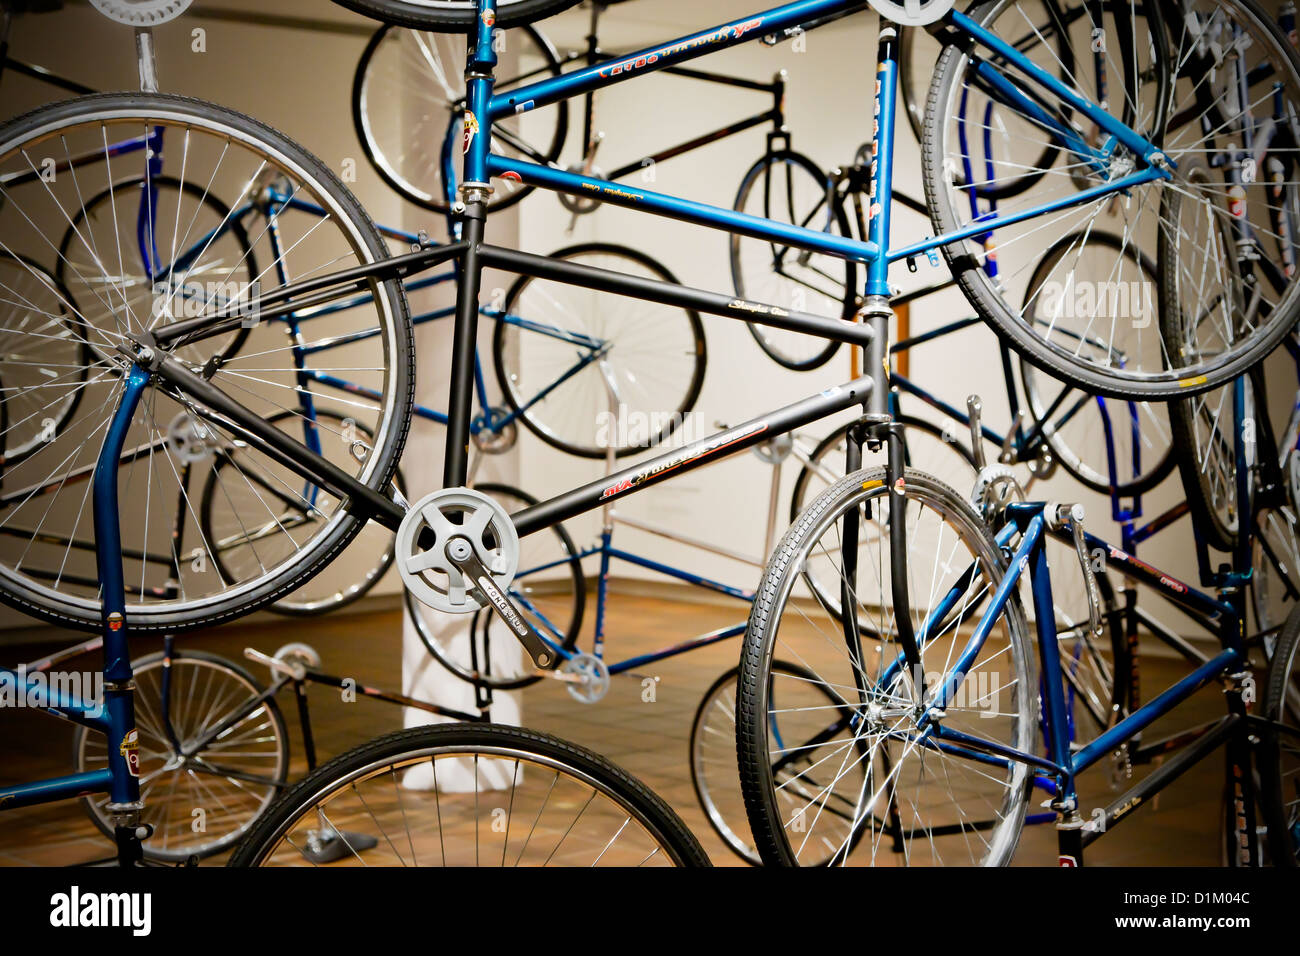 Art sculpture made from bicycles Stock Photo